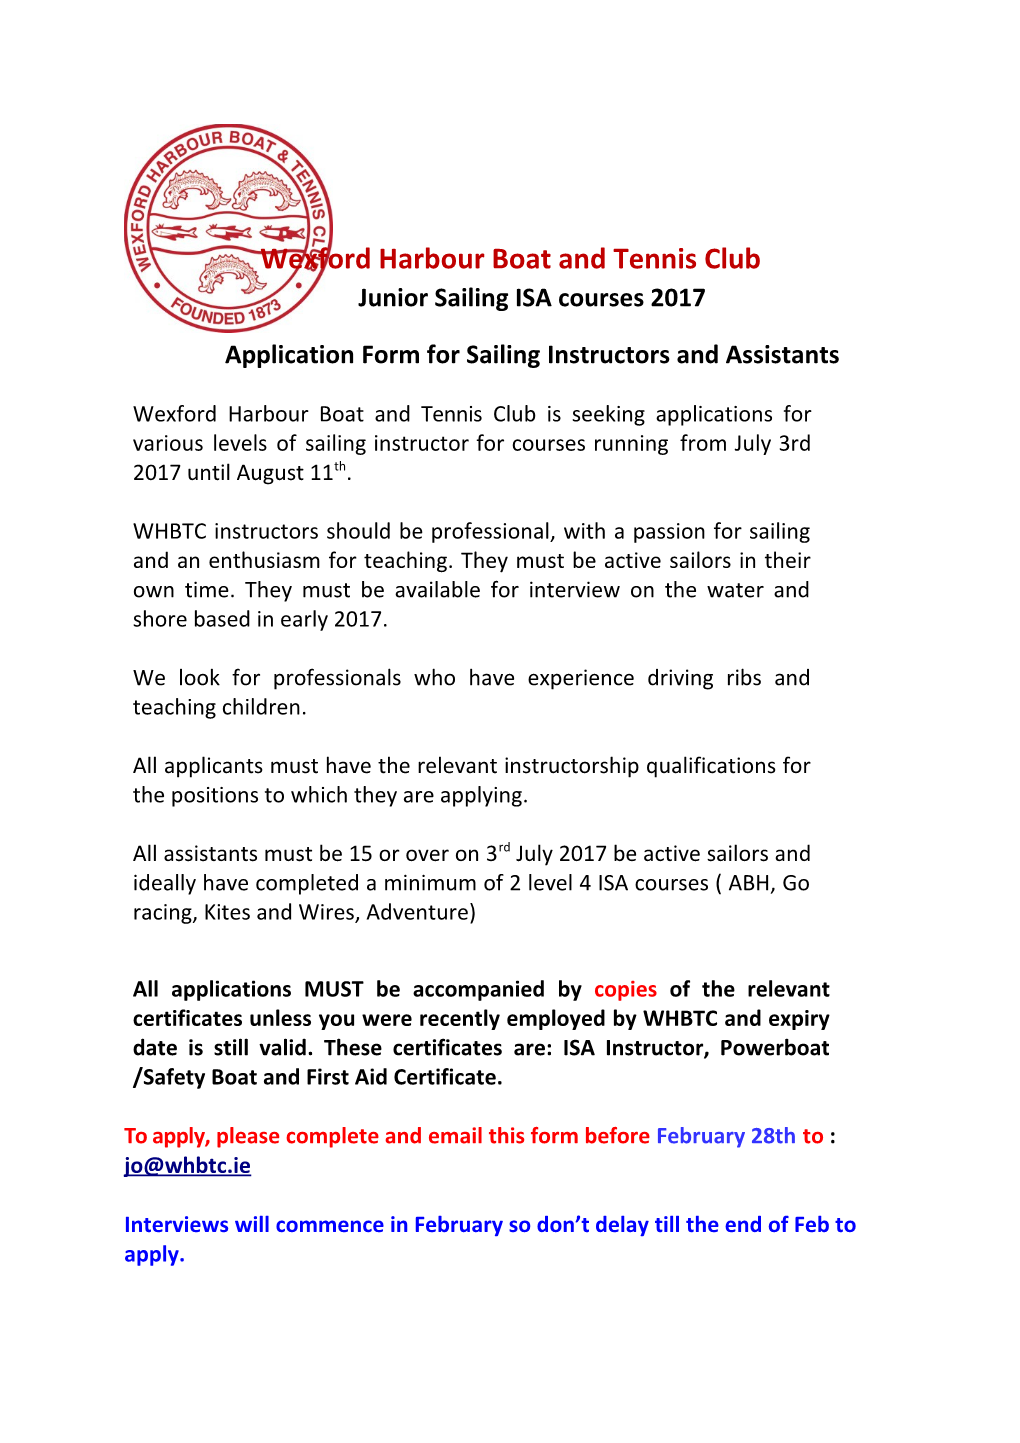 Wexford Harbour Boat and Tennis Club